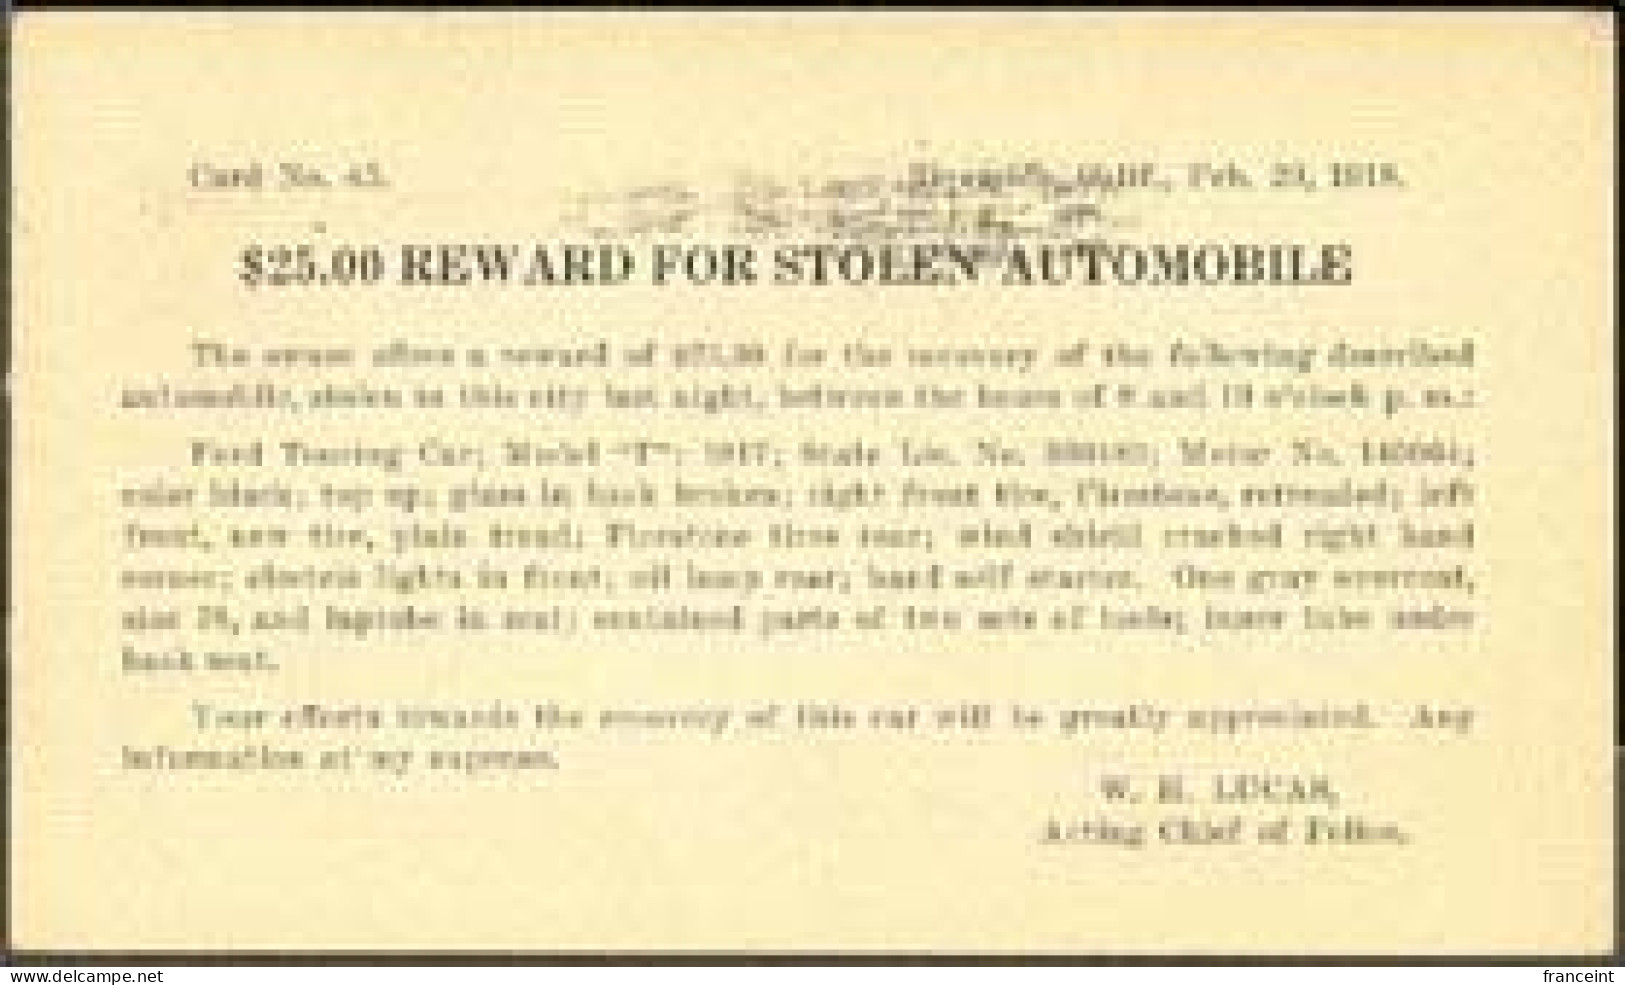 U.S.A.(1918) Auto Theft Reward Card. Postal Card Offering $25 Reward For Recovery Of Ford Touring Card, Model T, Stolen - Souvenirkaarten